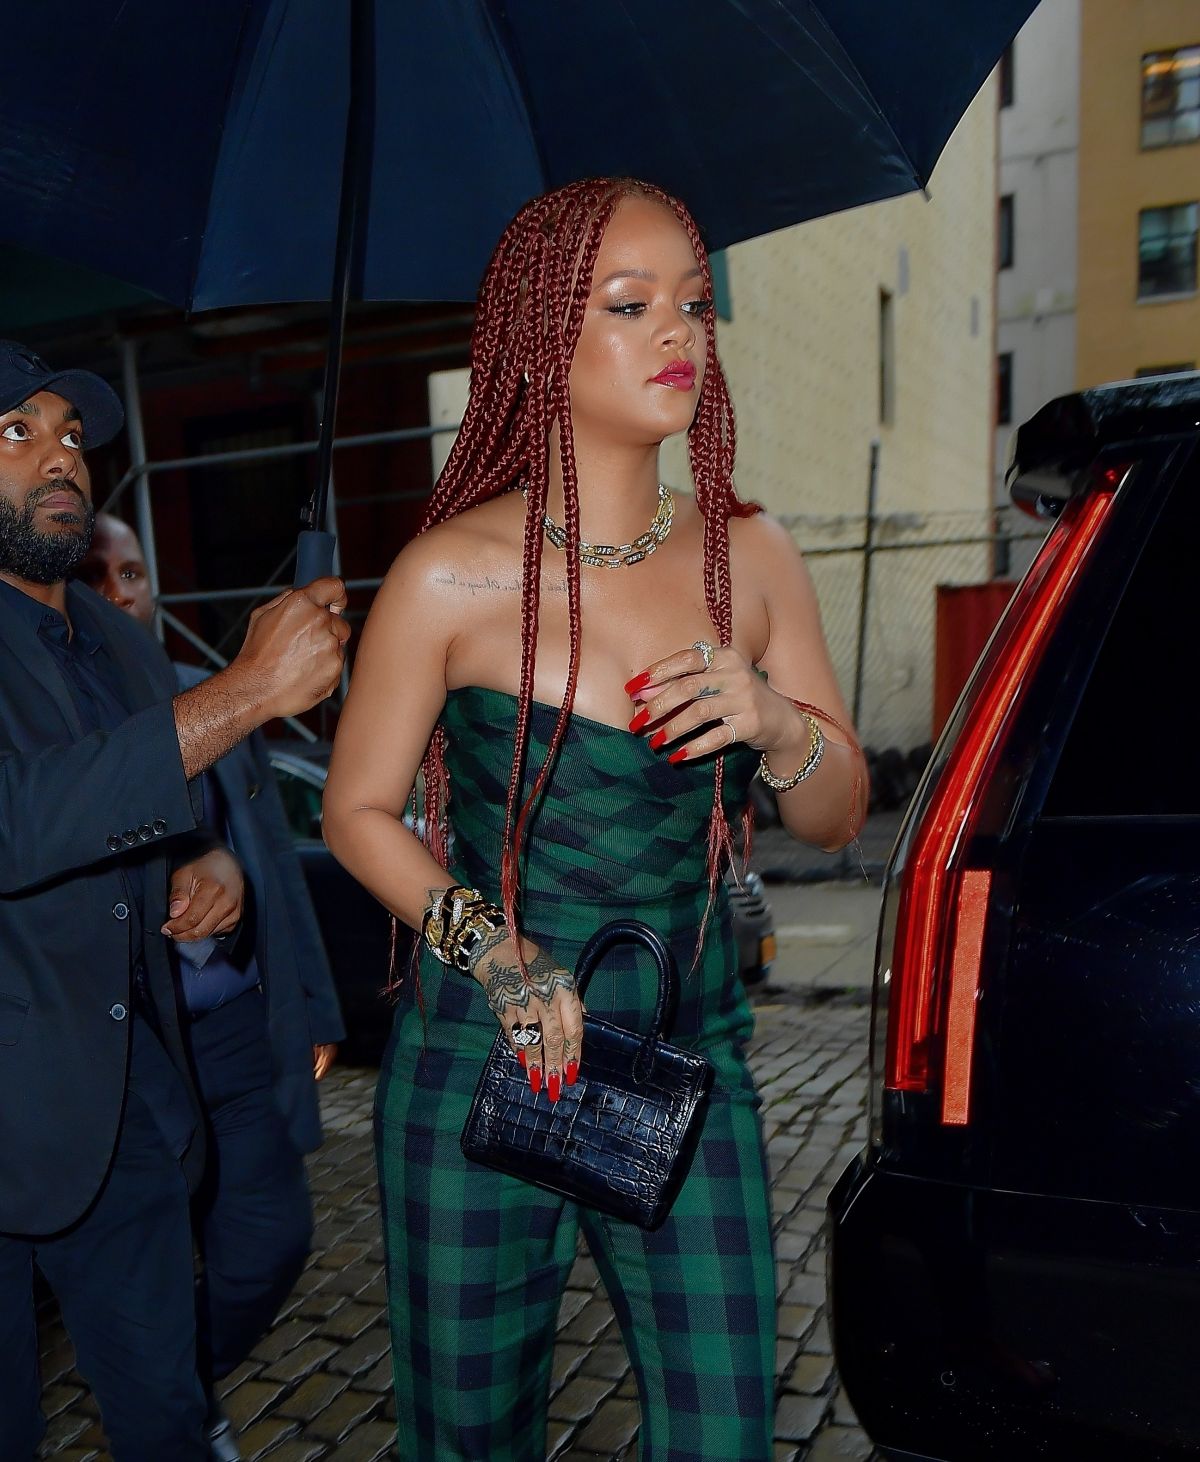 rihanna-arrives-at-late-night-with-seth-meyers-in-new-york-06-19-2019-4.jpg